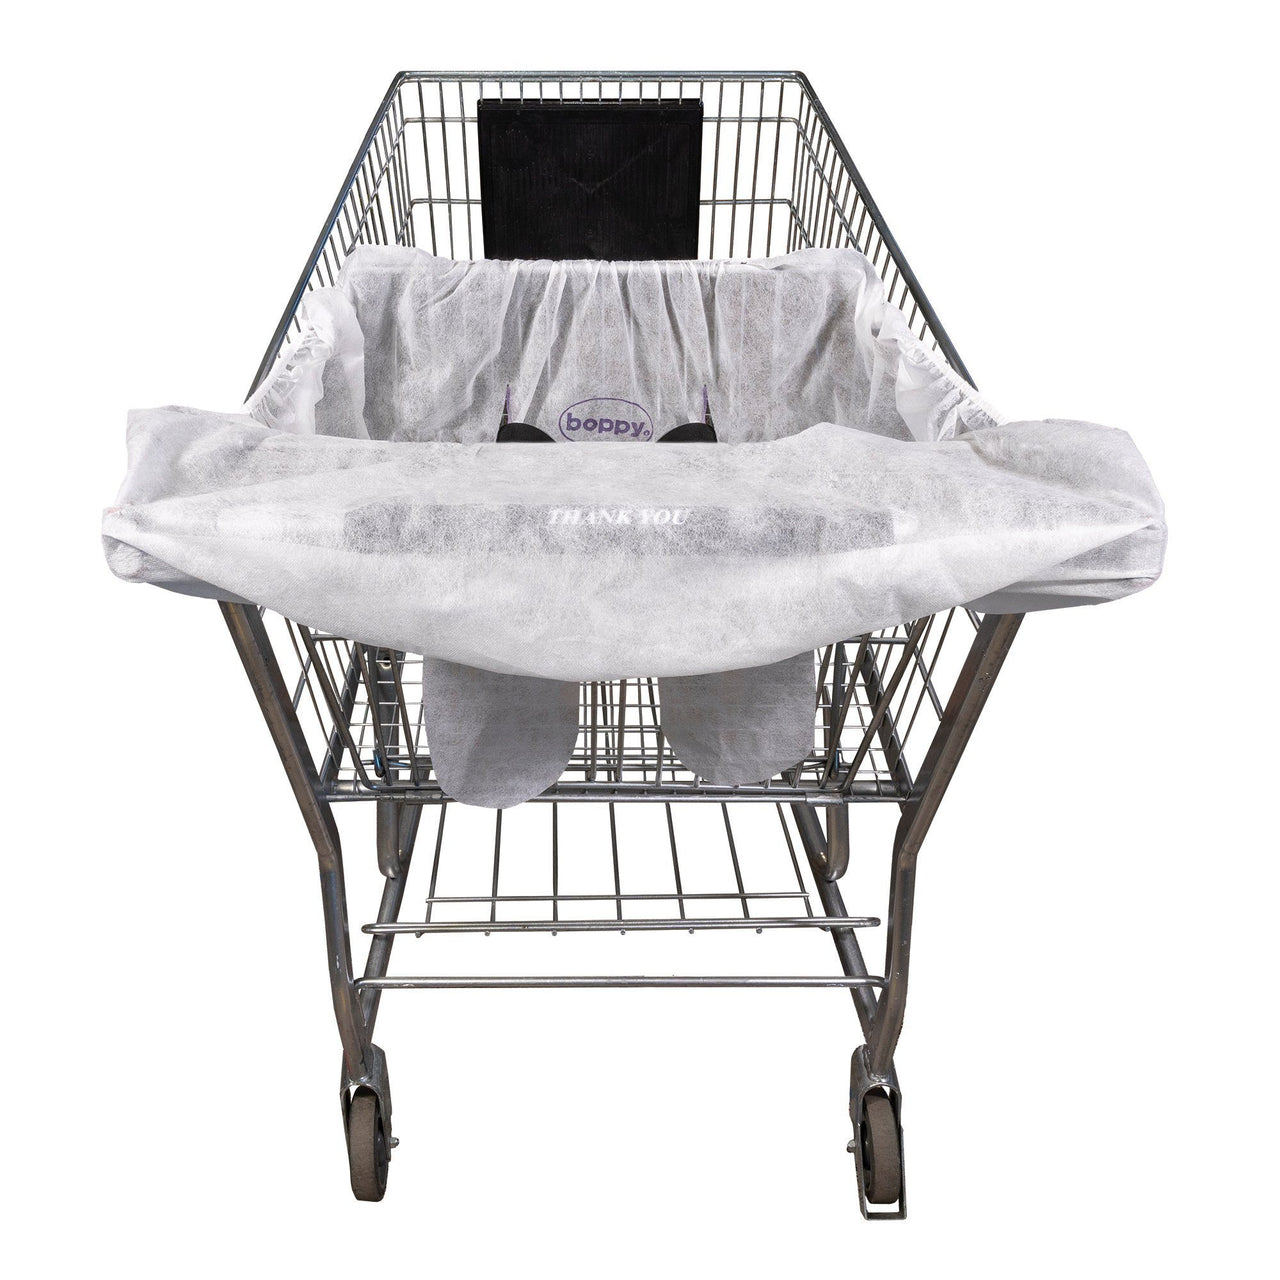 Boppy Disposable Shopping Cart Cover 5 Pack